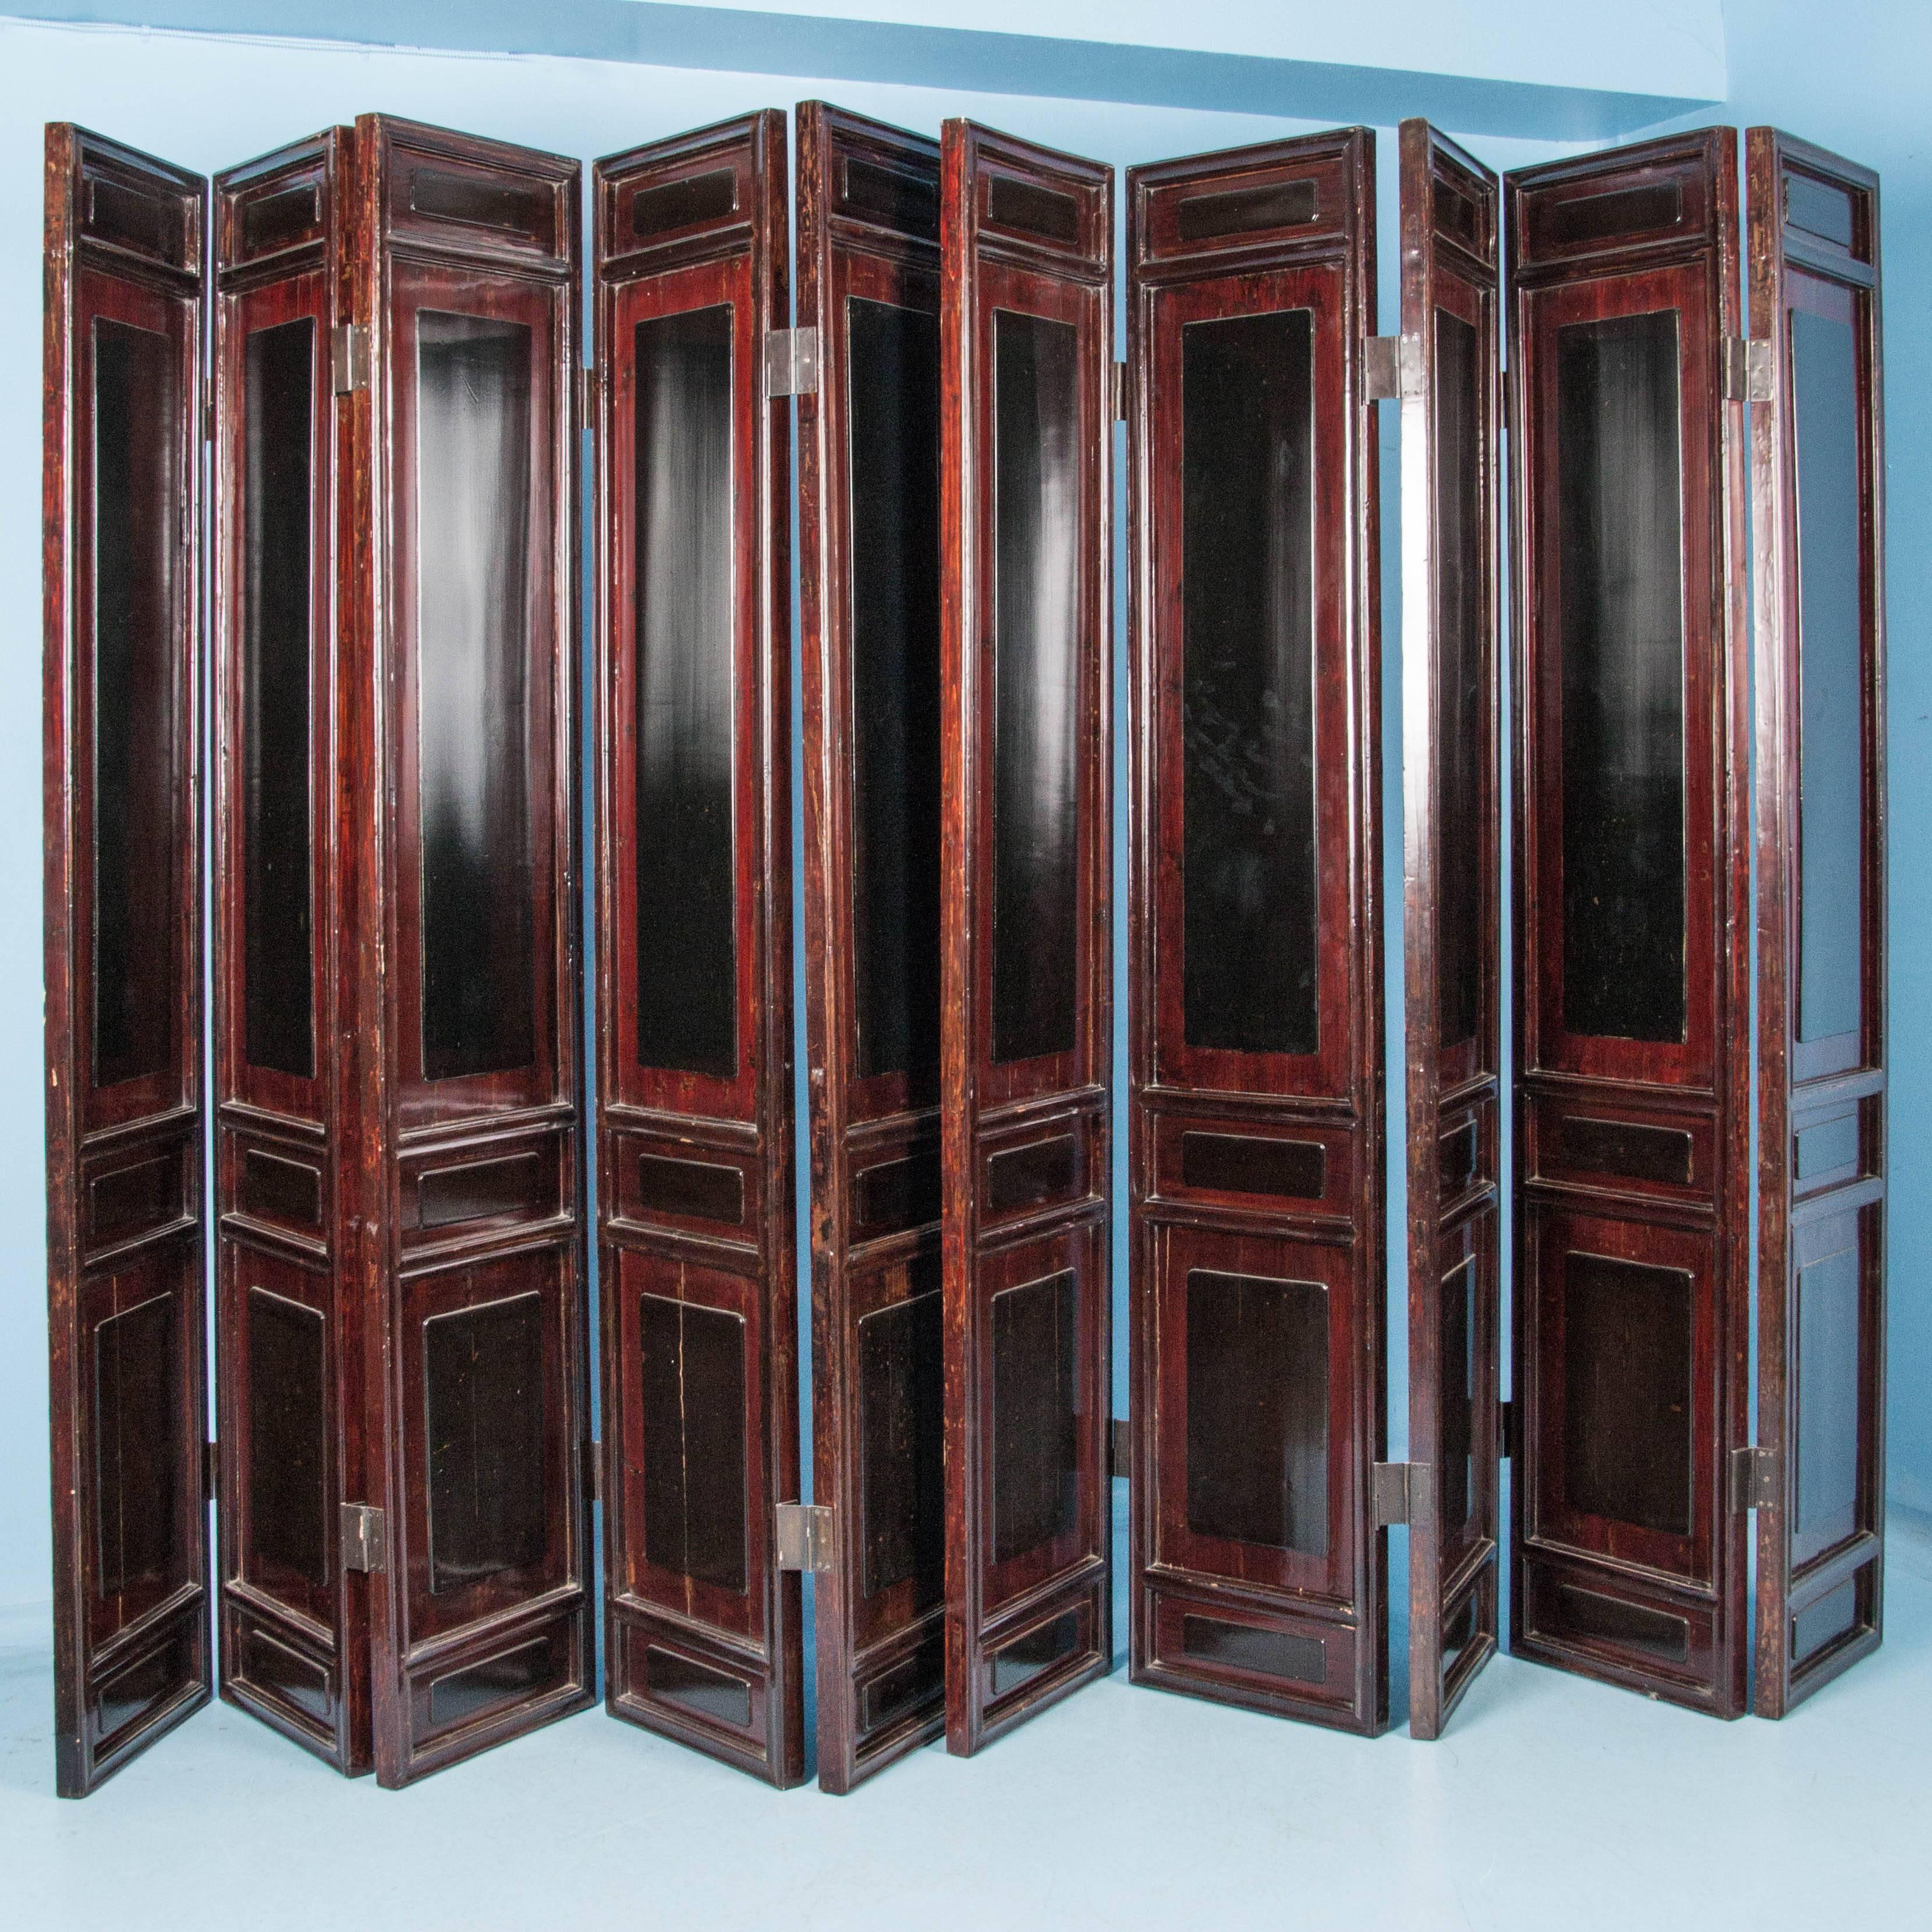 Grand set of ten red lacquered panels with brass hinges and accents of black on each of the raised panels. The color and design are the same on both sides. We have separated the screen into two freestanding screens with five hinged panels each (the